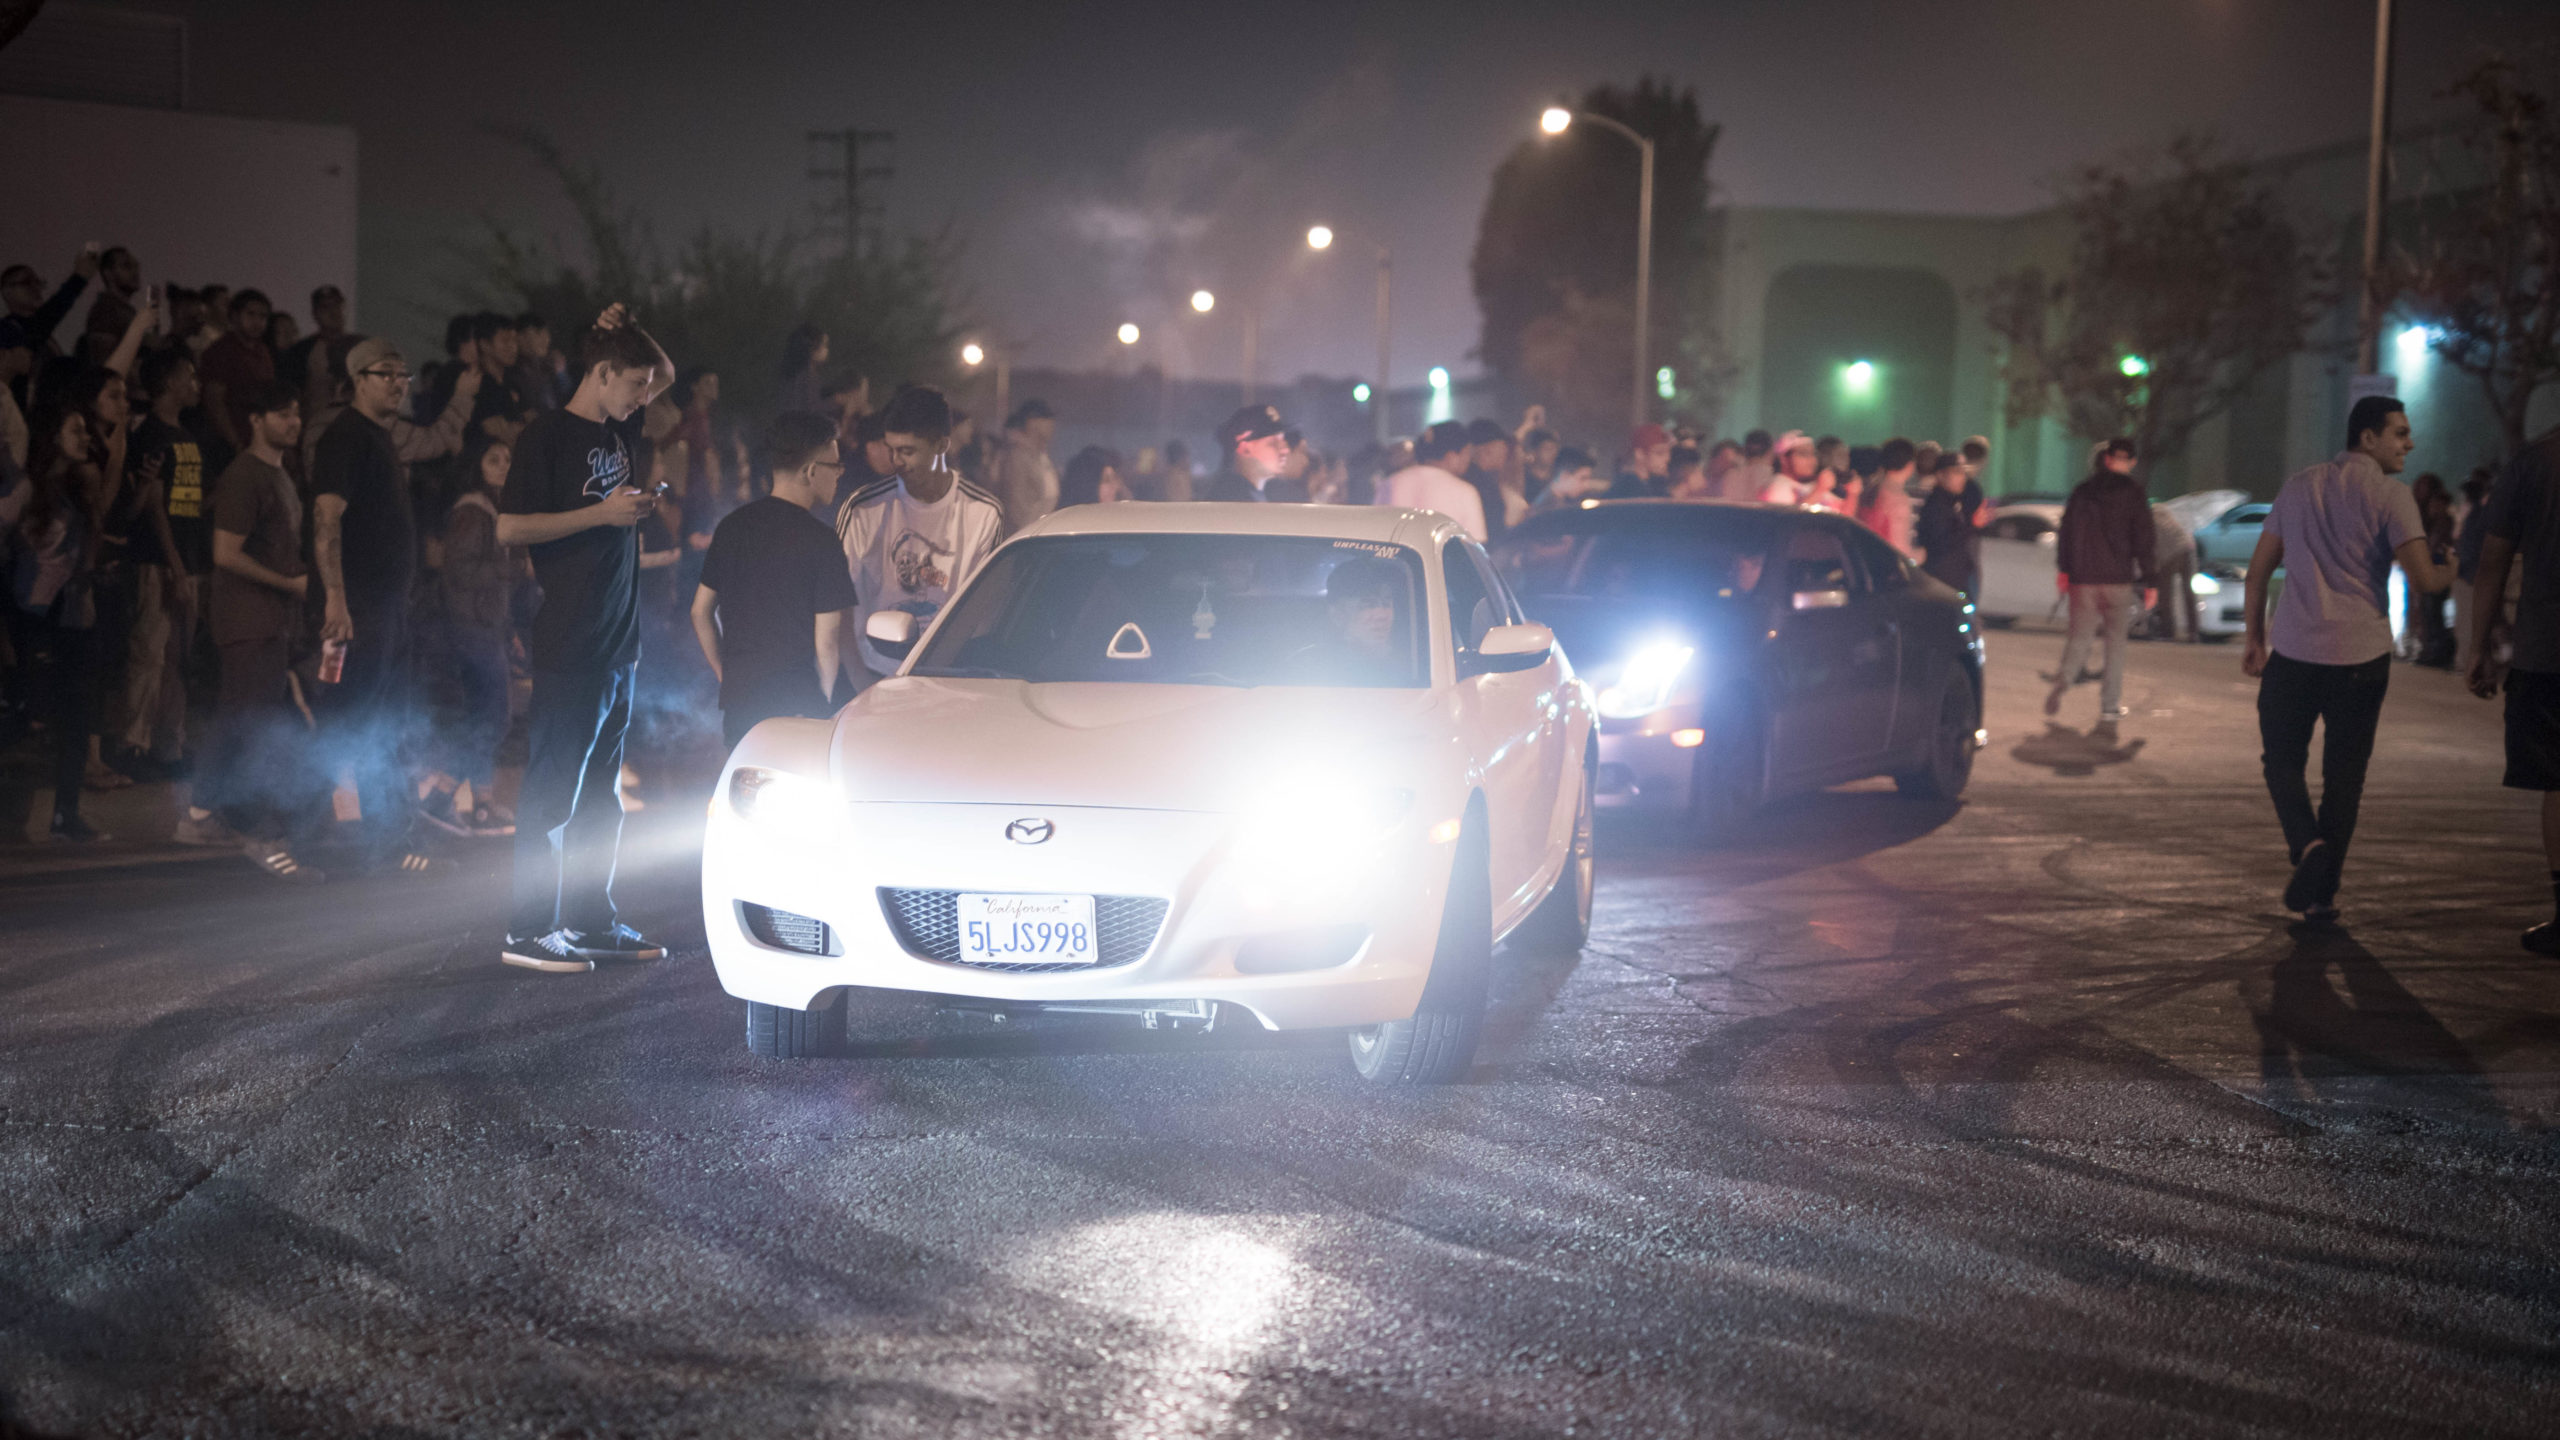 I Went To An Underground Car Meet In America And It Was Ridiculous